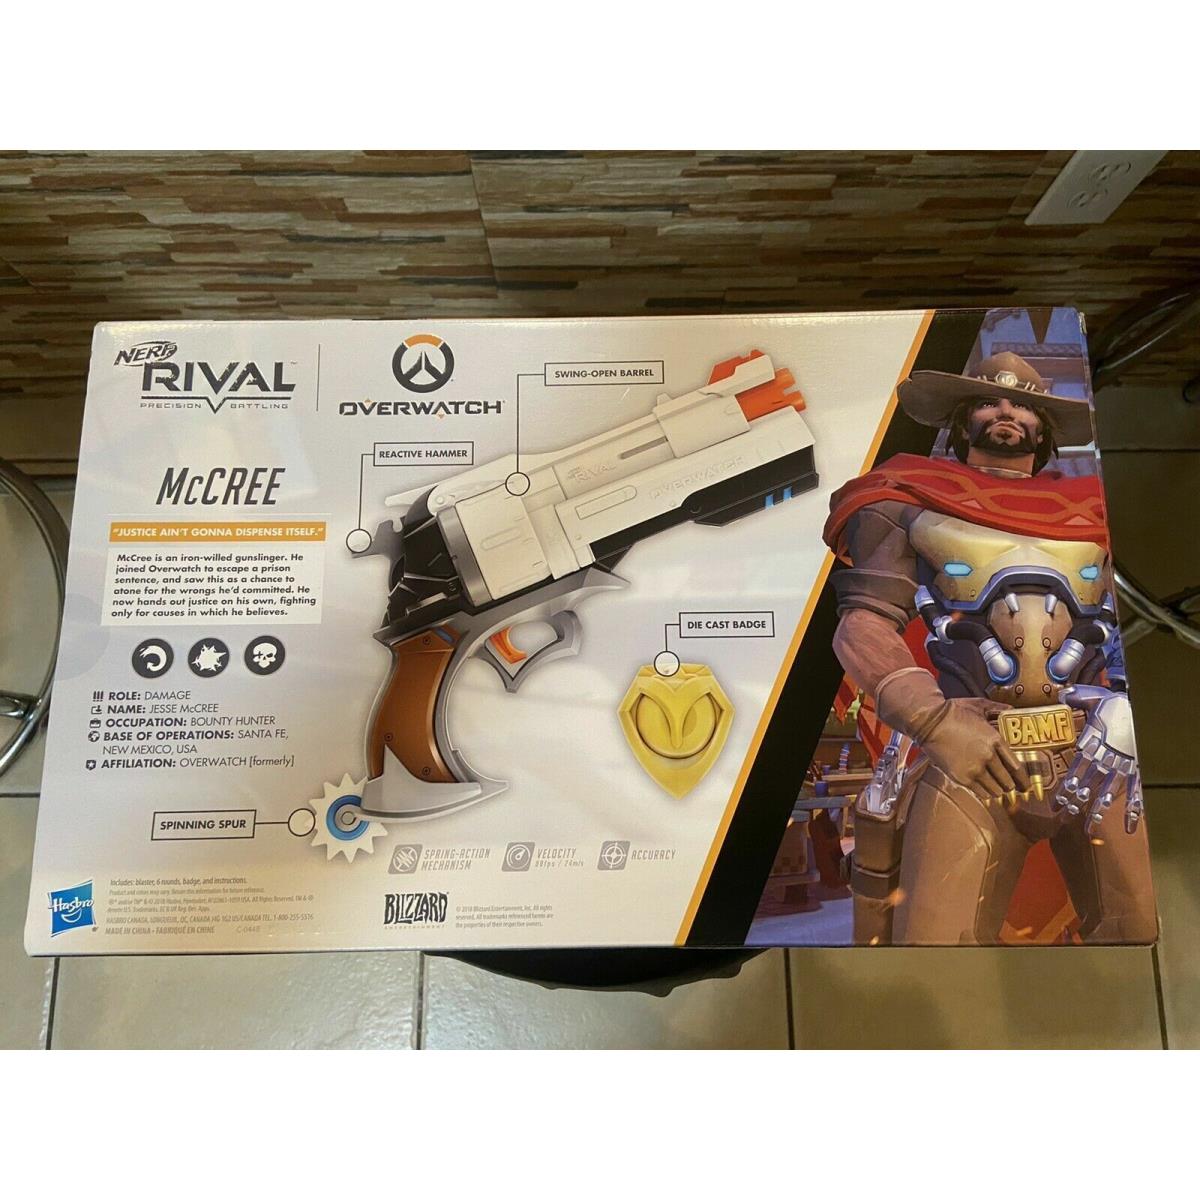 Overwatch Mccree Nerf Rival Blaster W/die Cast Badge and 6 Nerf Rival Rounds